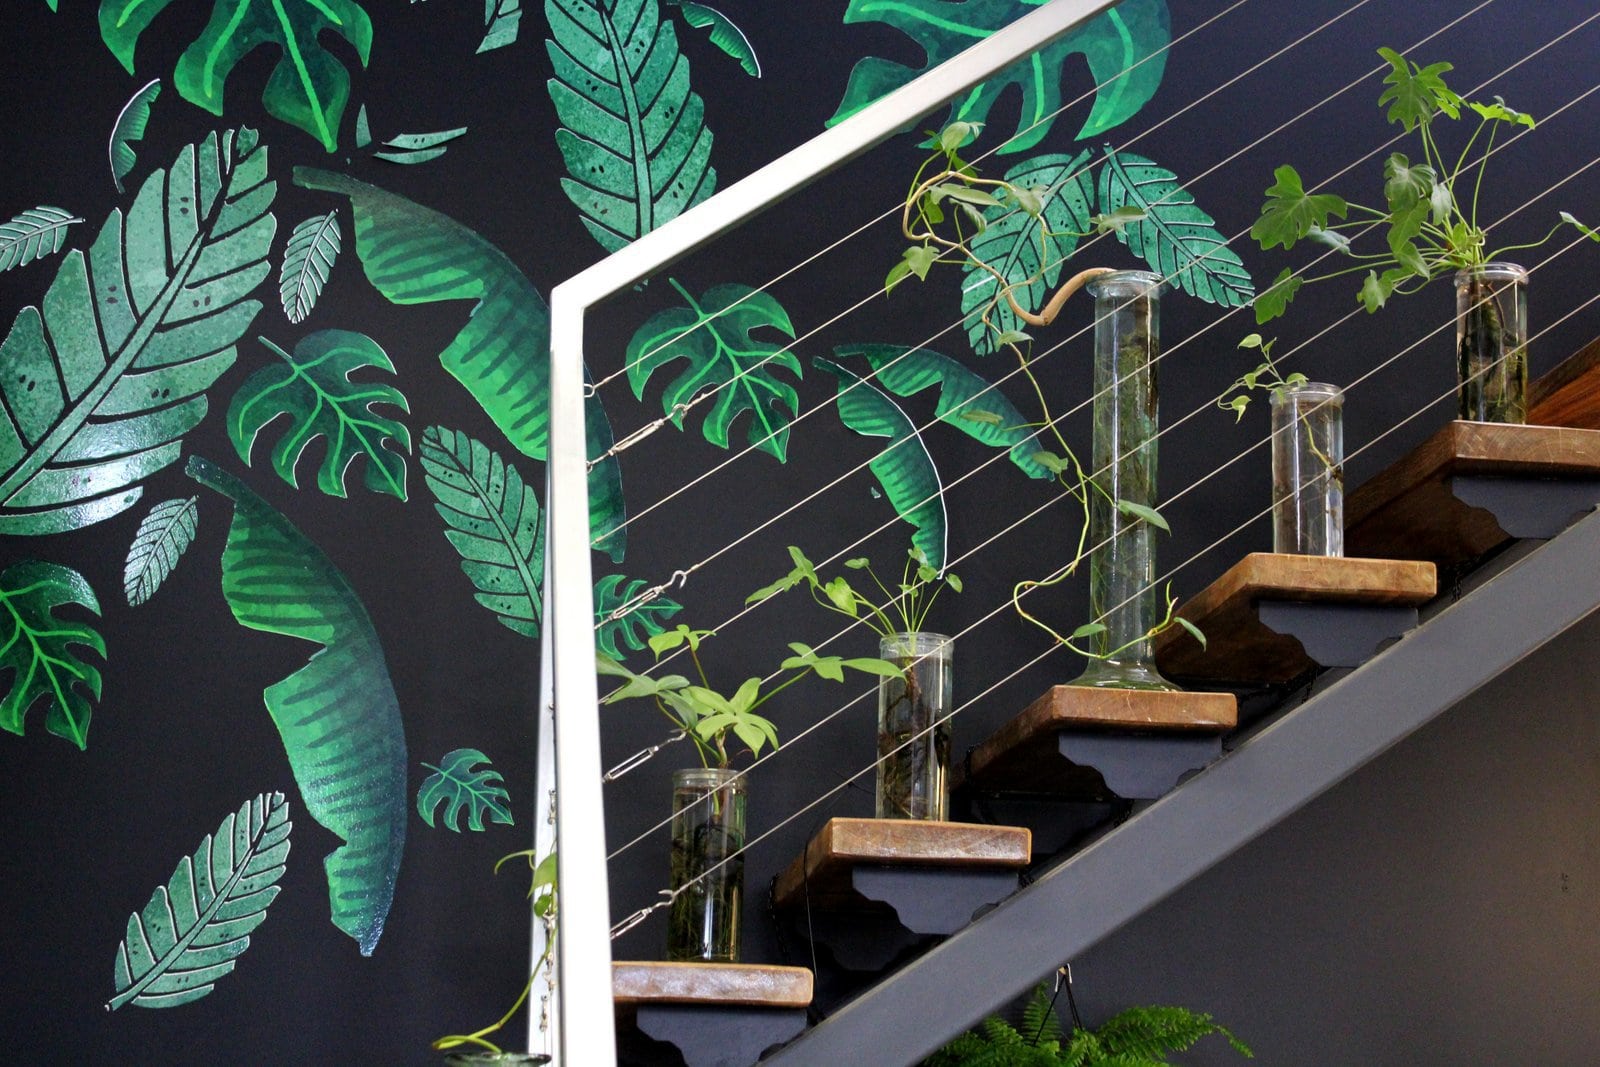 Indoor plants decorating: Plants in glass vases in steps of staircase